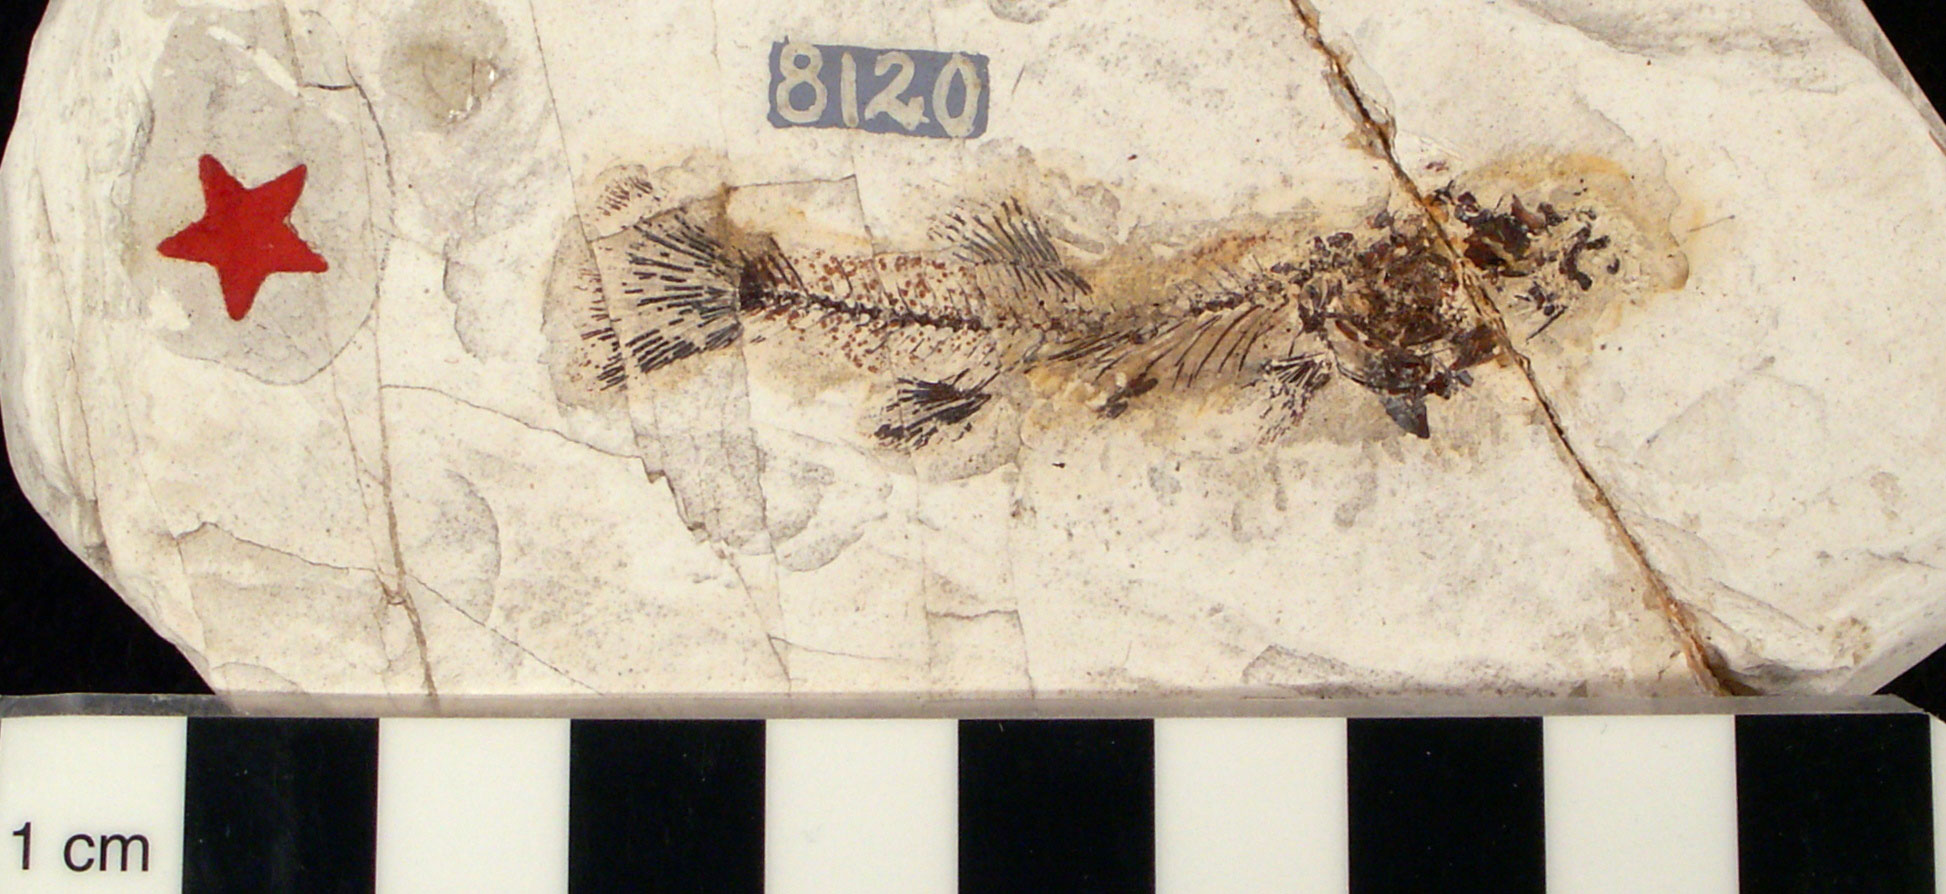 Photograph of a small fish fossil preserved in off-white rock. The fish is about 5.5 to 6 centimeters long.